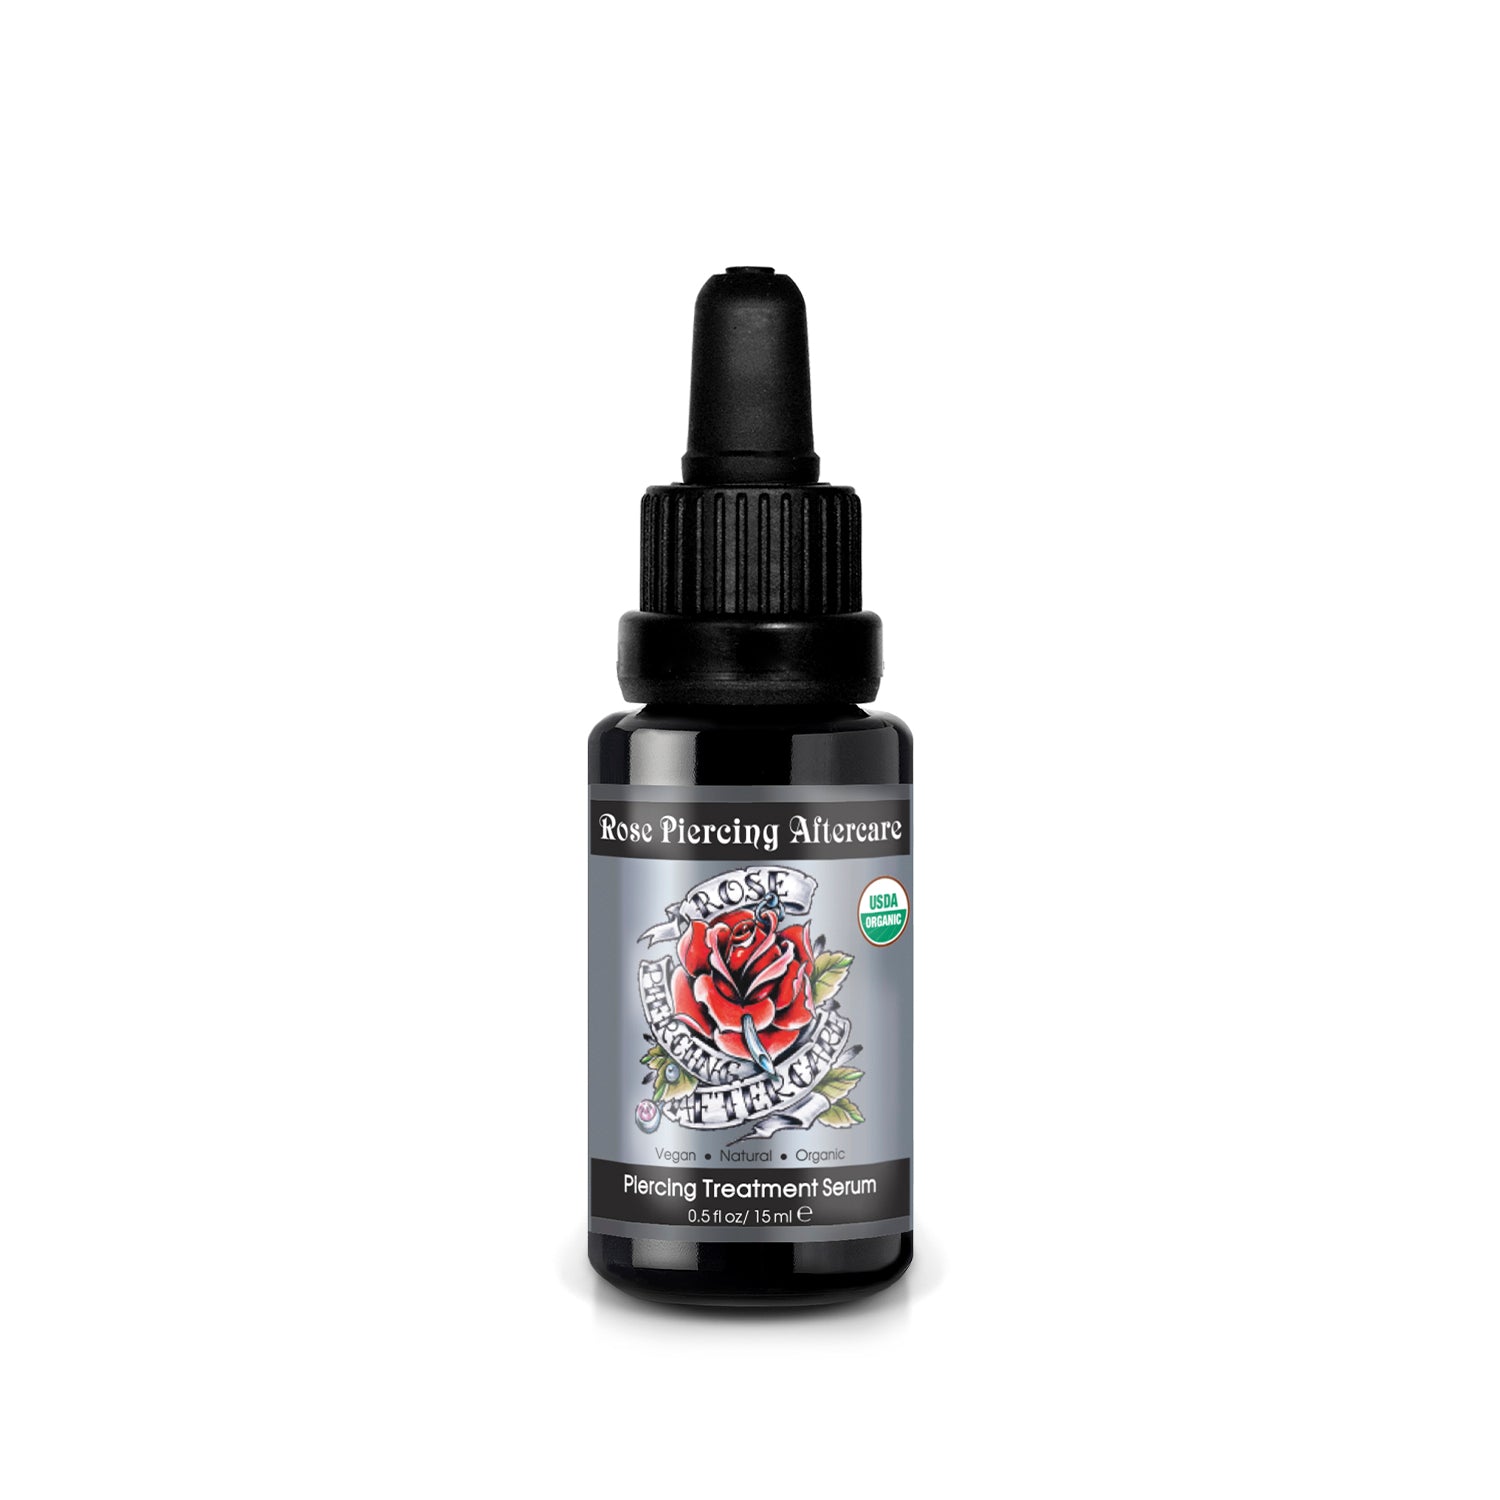 A bottle of Alteya Organics' Piercing Aftercare - USDA Certified Organic- 0.5 Fl Oz/15mL, perfect for healing body piercings, on a white background.